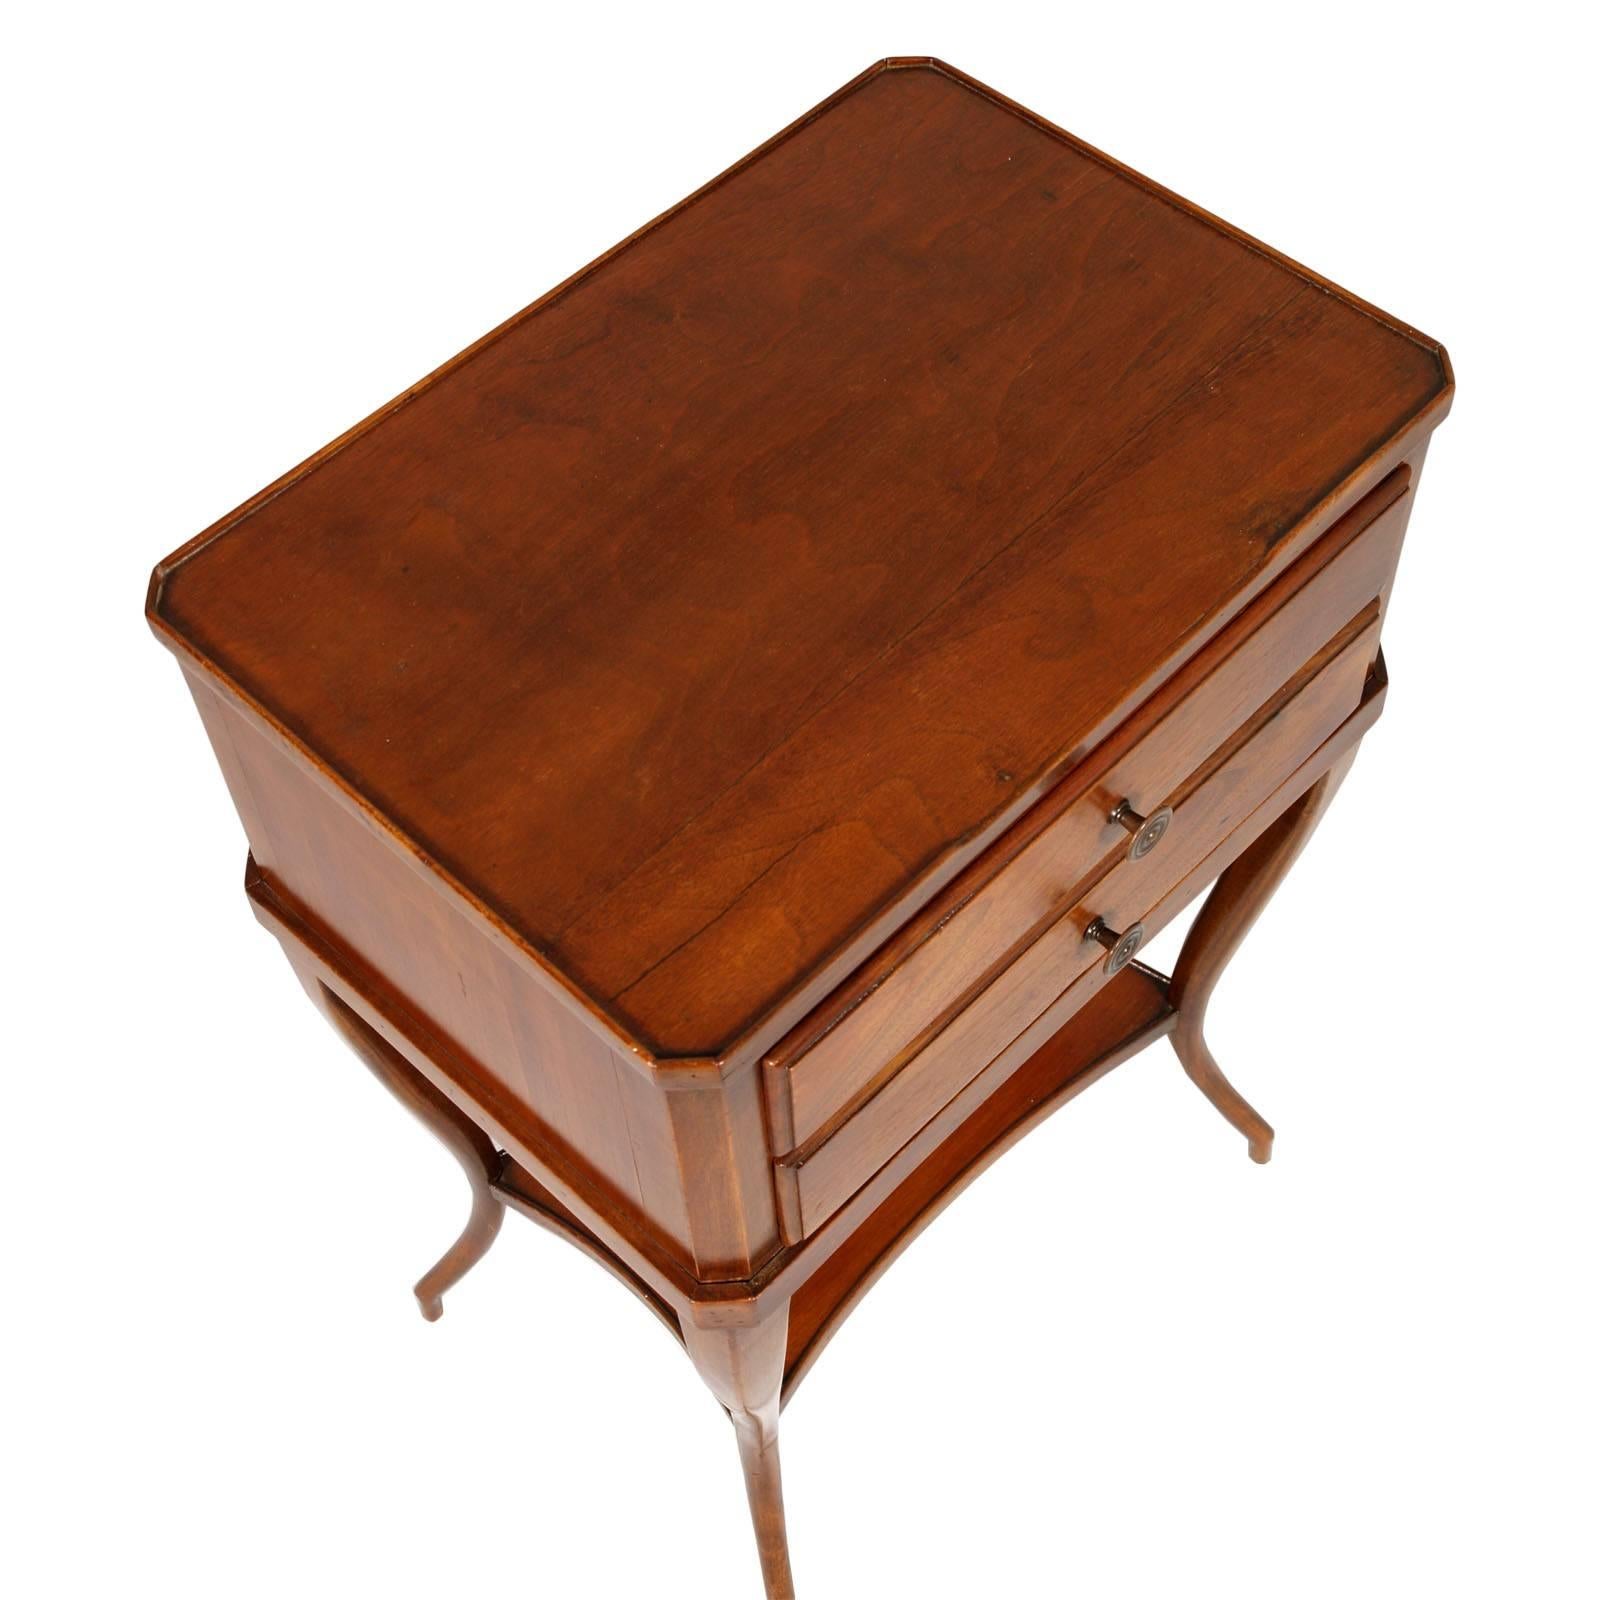 Early 20th century French Louis XVI, little table, cabinet, nightstand in walnut wax-polished. Very elegant, in excellent patina e conditions

Measures cm: H 66, W 43, D 30 (shelf height 27cm).